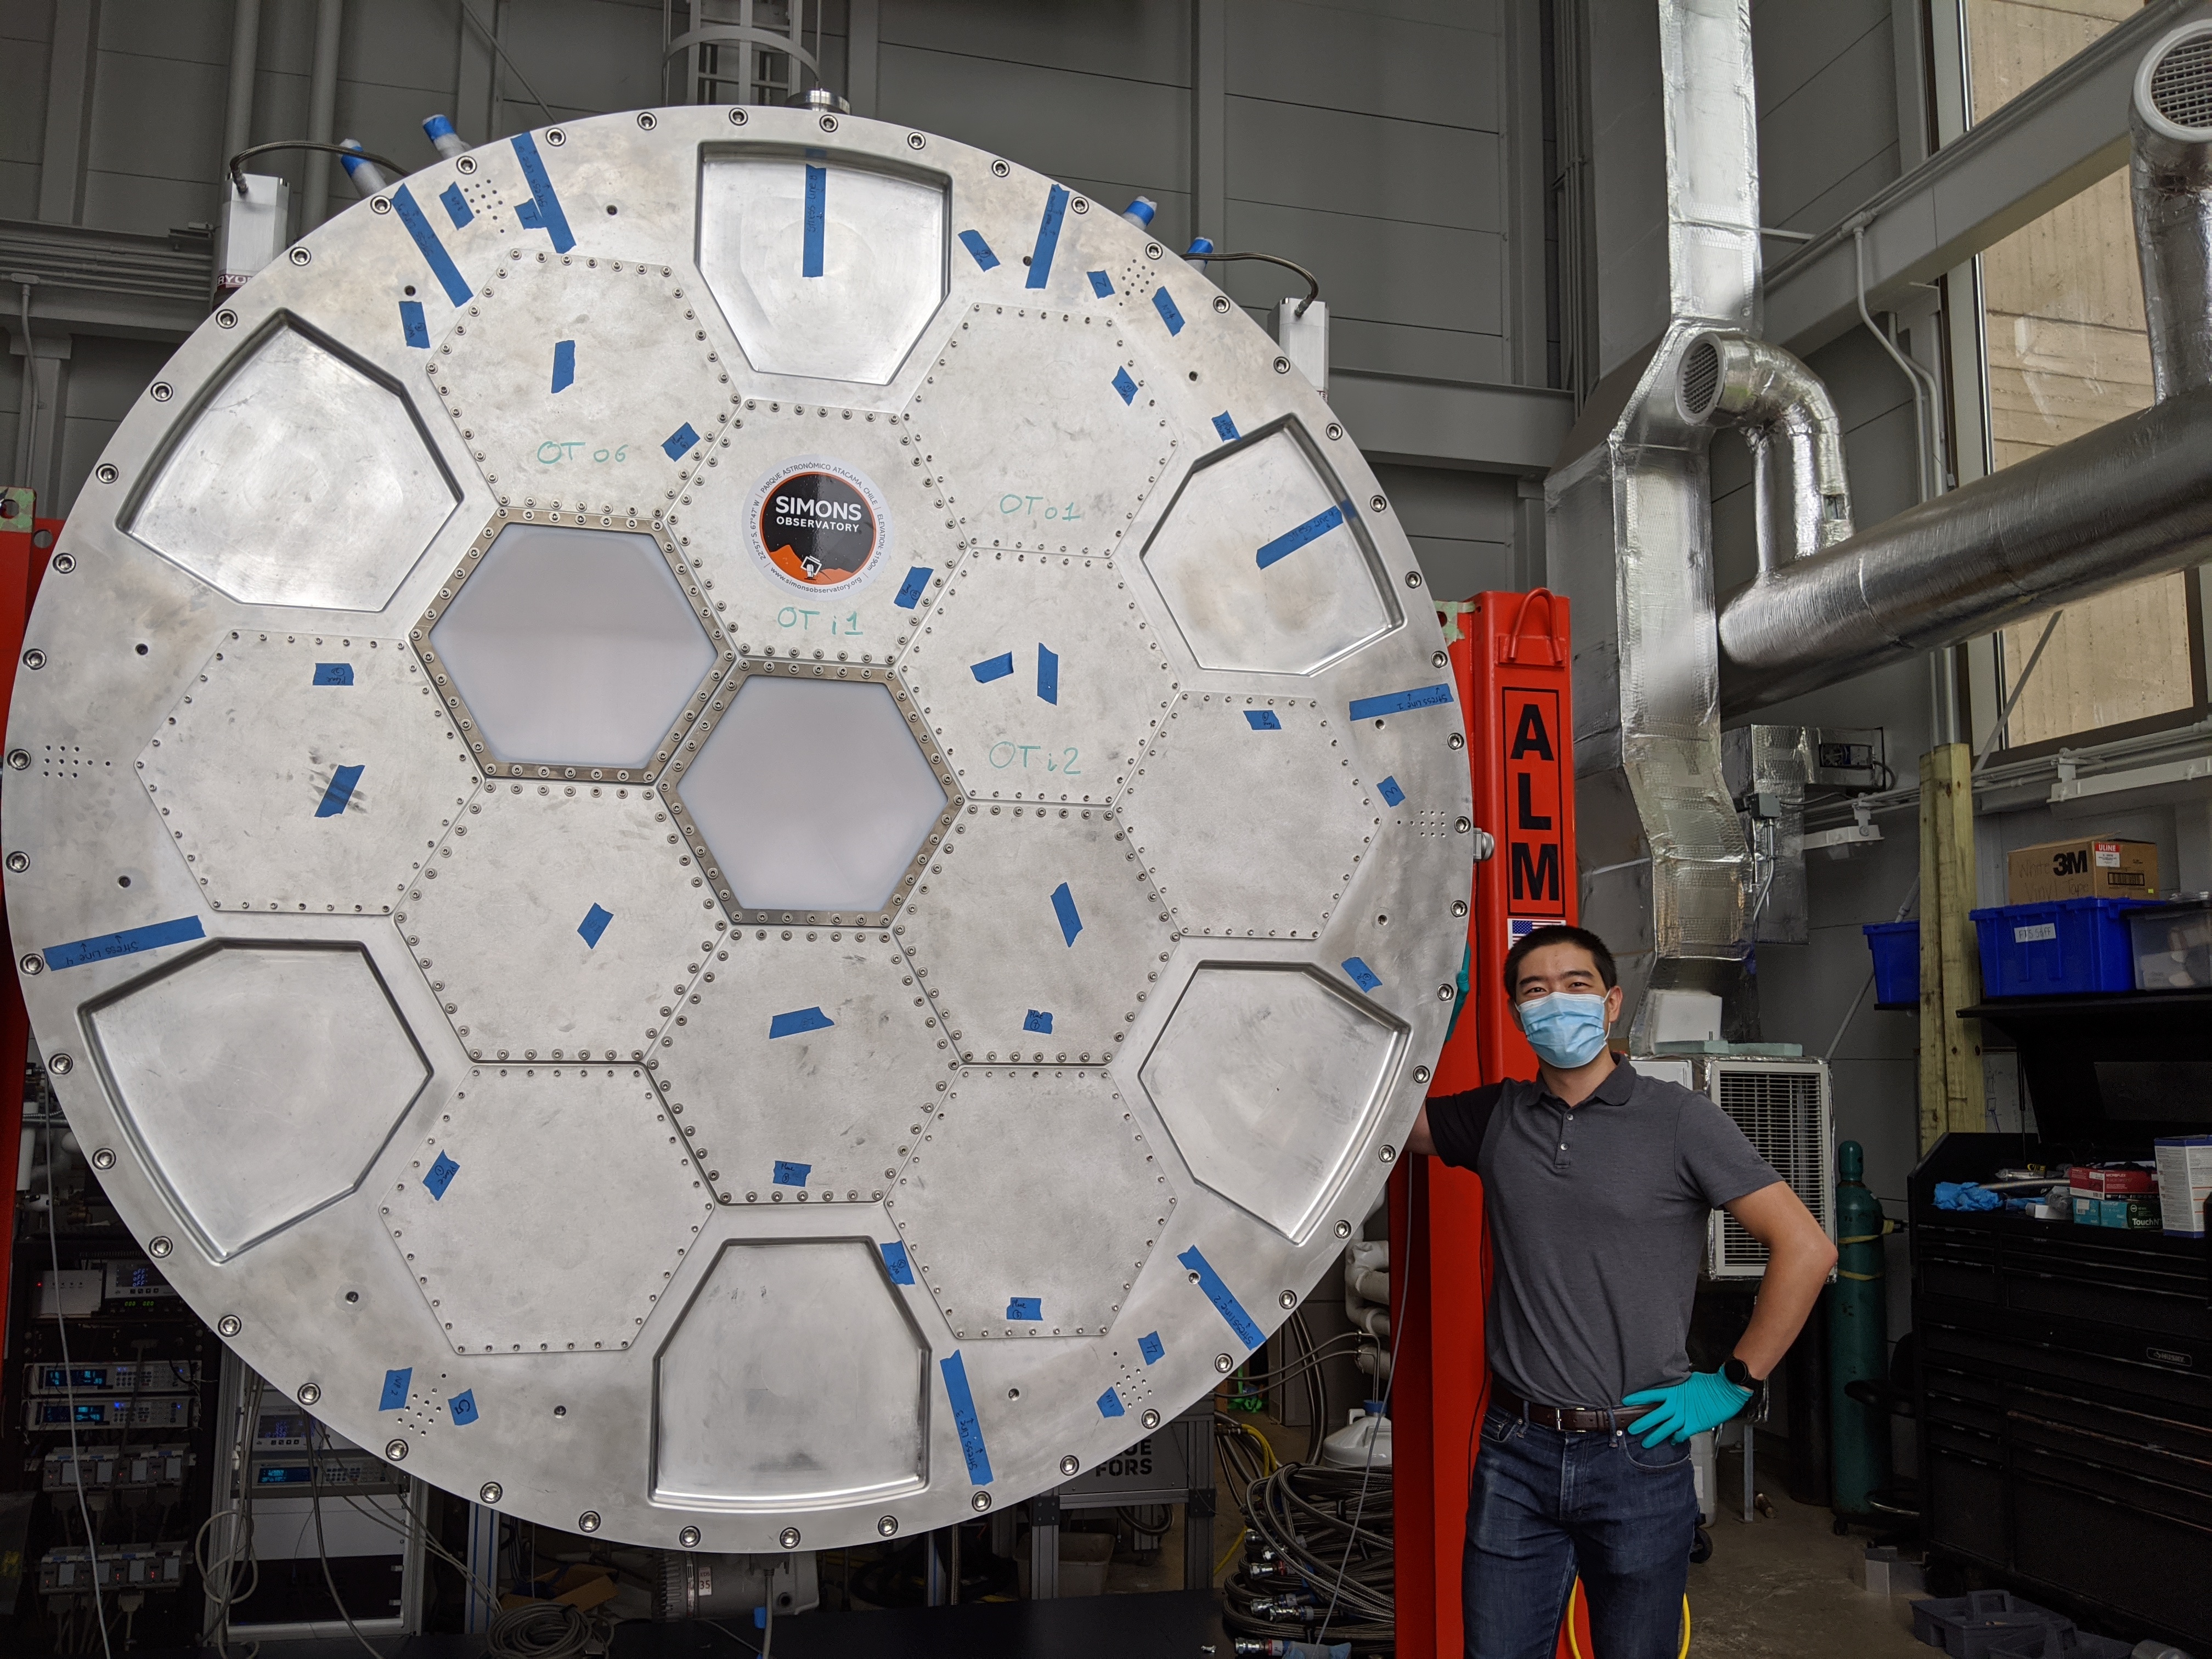 Ningfeng posing next to the large metal LATR inside of a research lab